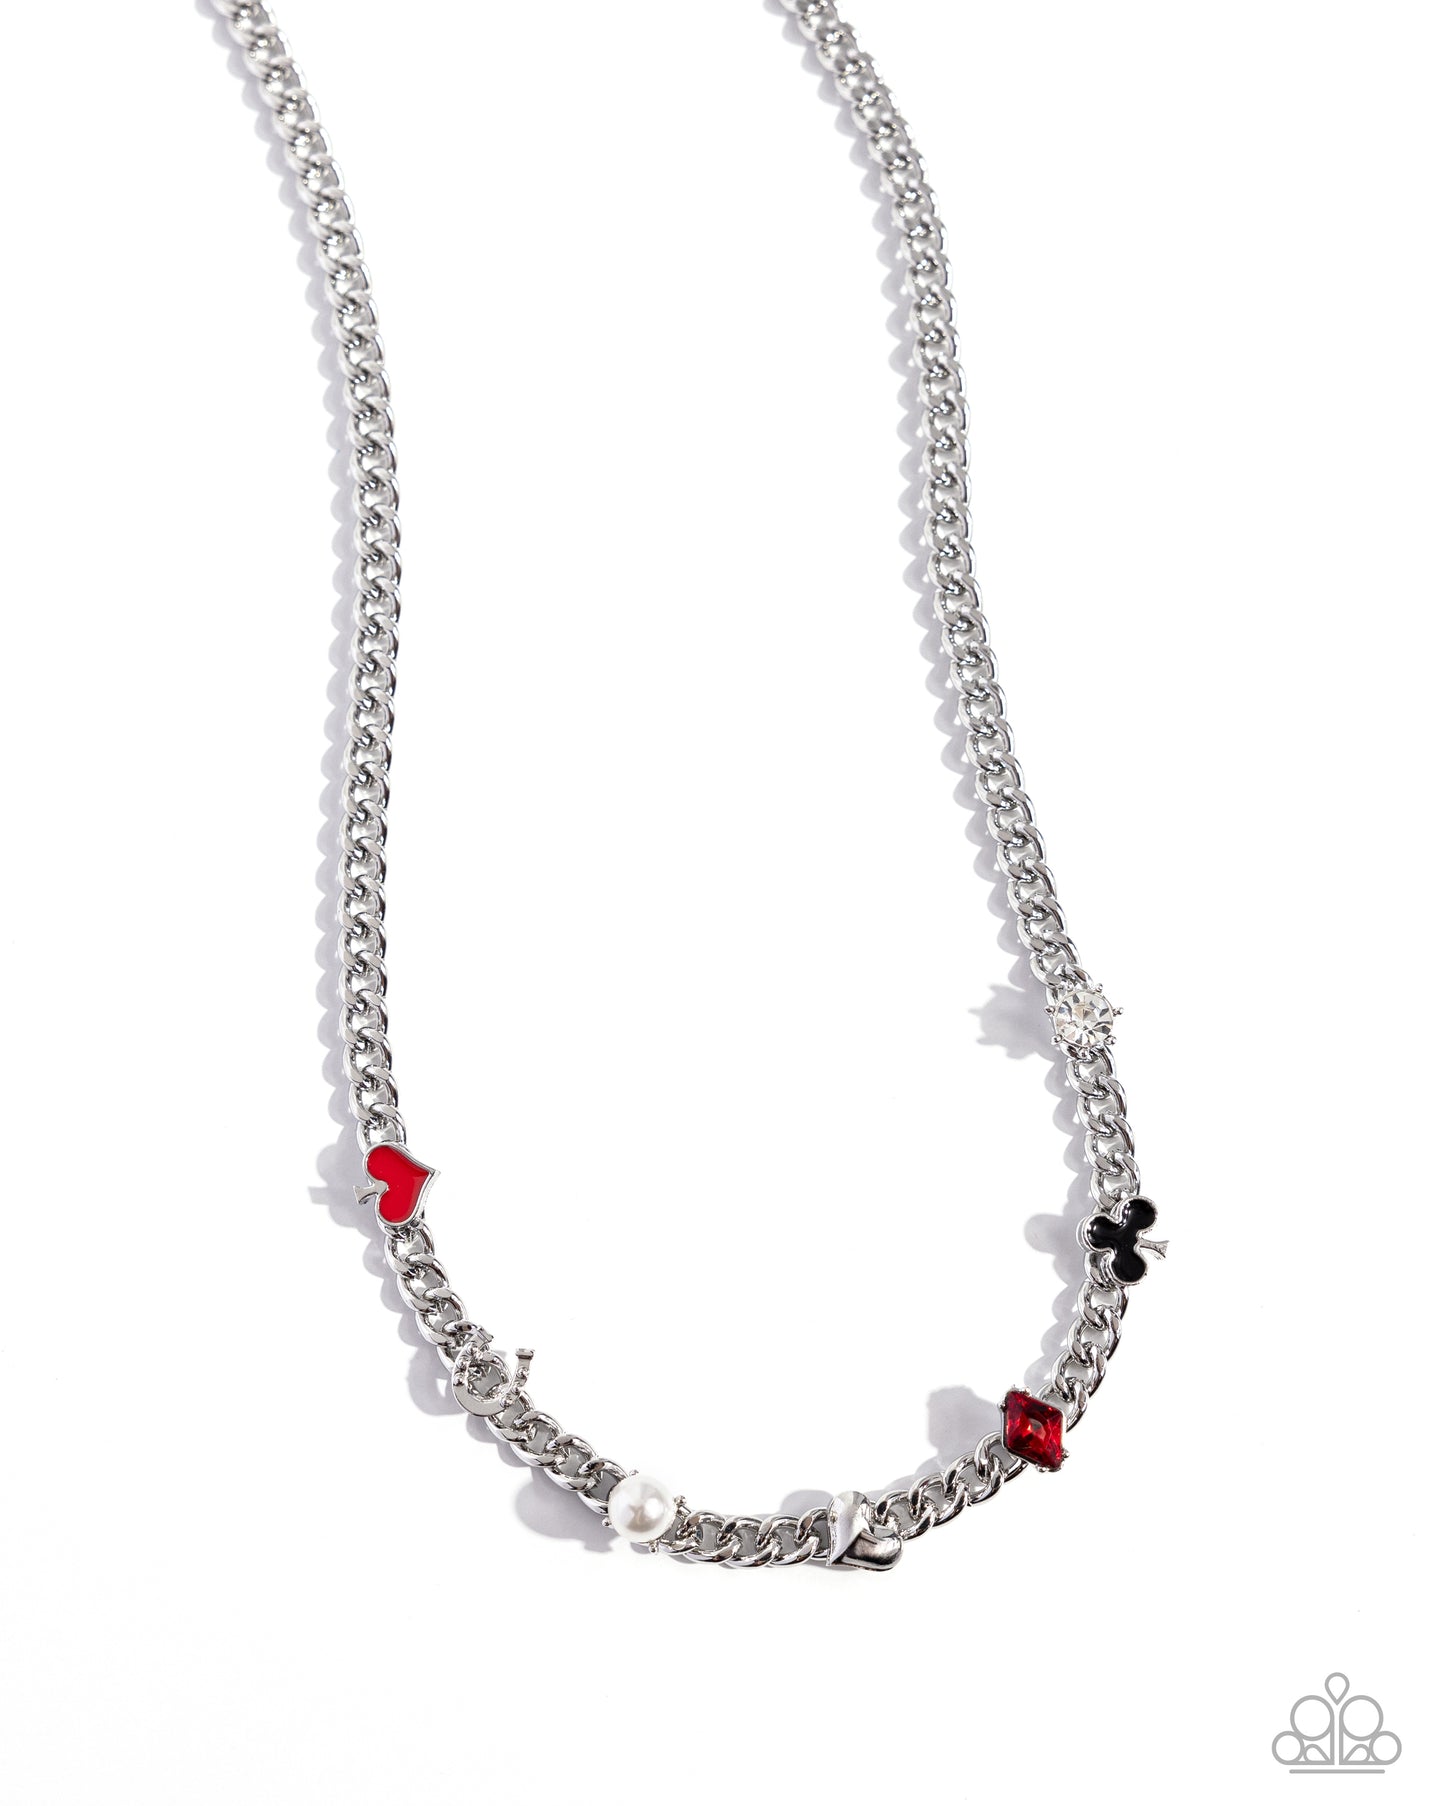 Paparazzi Accessories - Vegas Vault - Red Necklaces Zpronged in place along a high-sheen silver curb chain, a Vegas-styled collection of charms shimmer along the neckline. The various charms include a white pearl, silver heart, white gem, white rhinestone-encrusted horseshoe, a red-painted spade, a black-painted club, and a red diamond gem. Features an adjustable clasp closure. Sold as one individual necklace. Includes one pair of matching earrings.